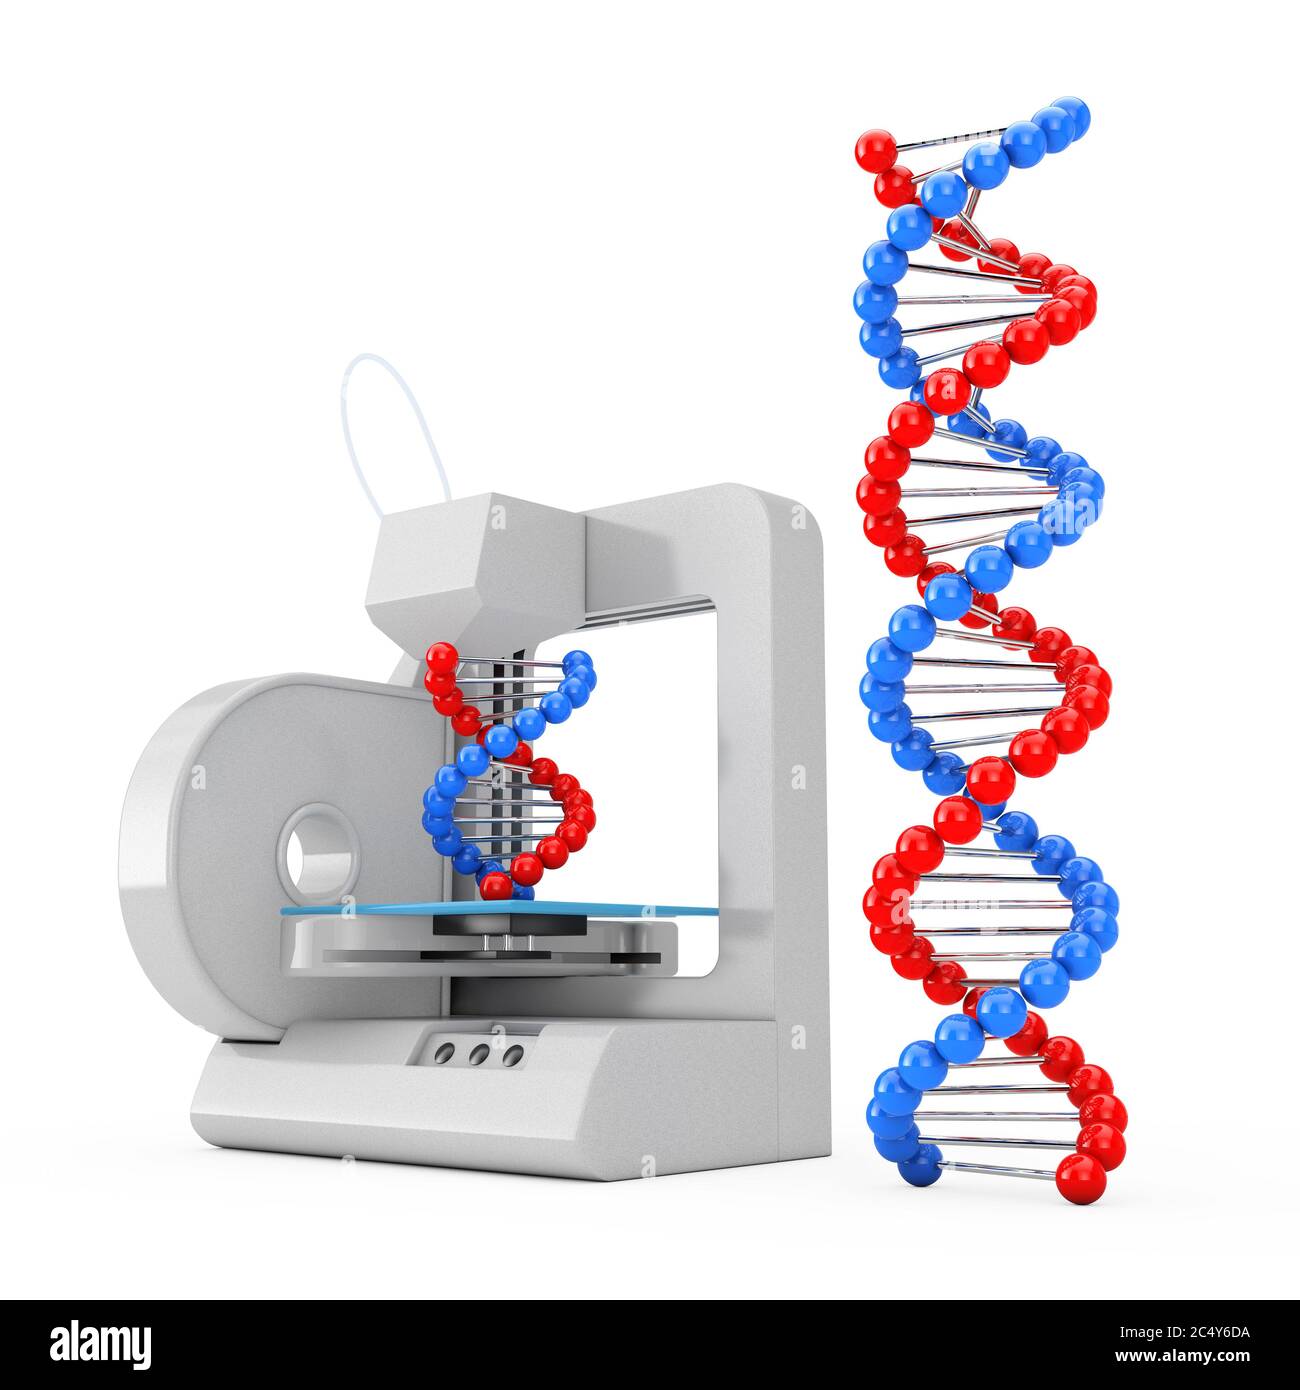 Molecular model printer stock photography and images -